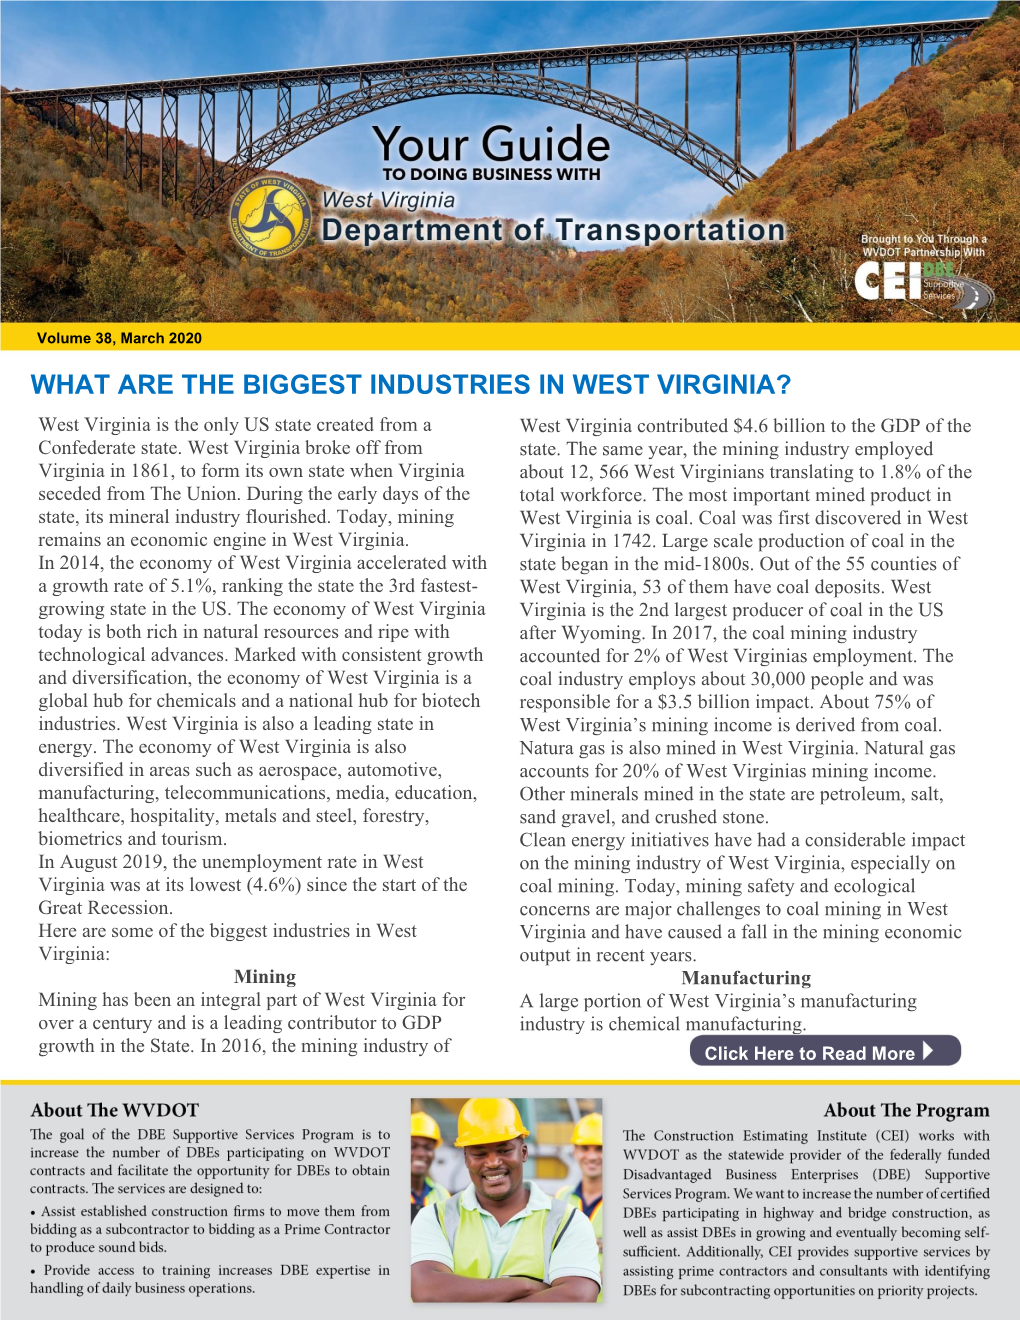 What Are the Biggest Industries in West Virginia?